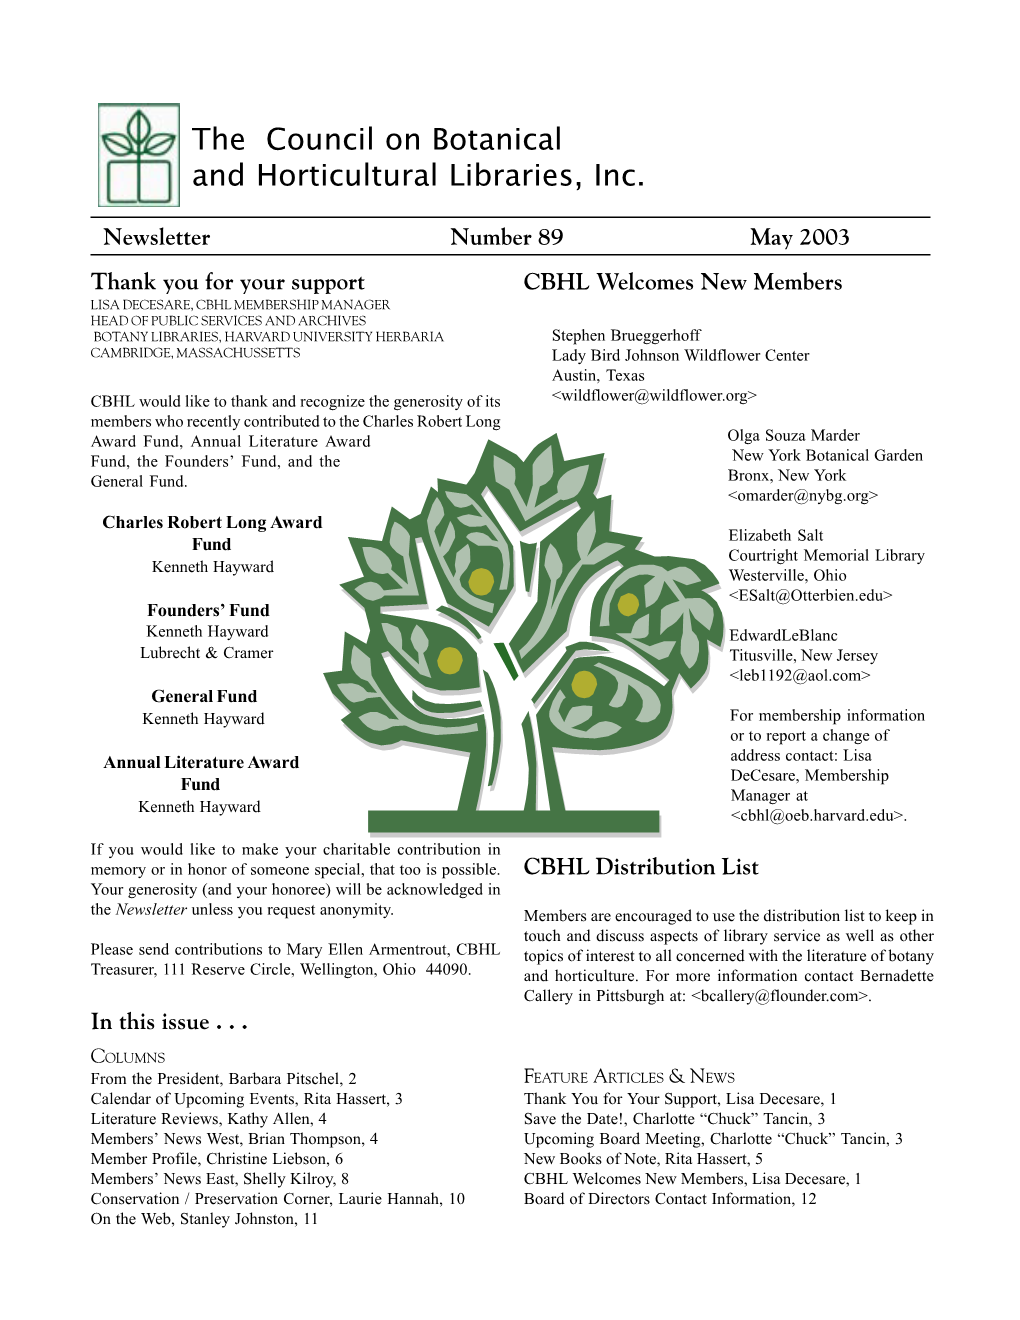 The Council on Botanical and Horticultural Libraries, Inc